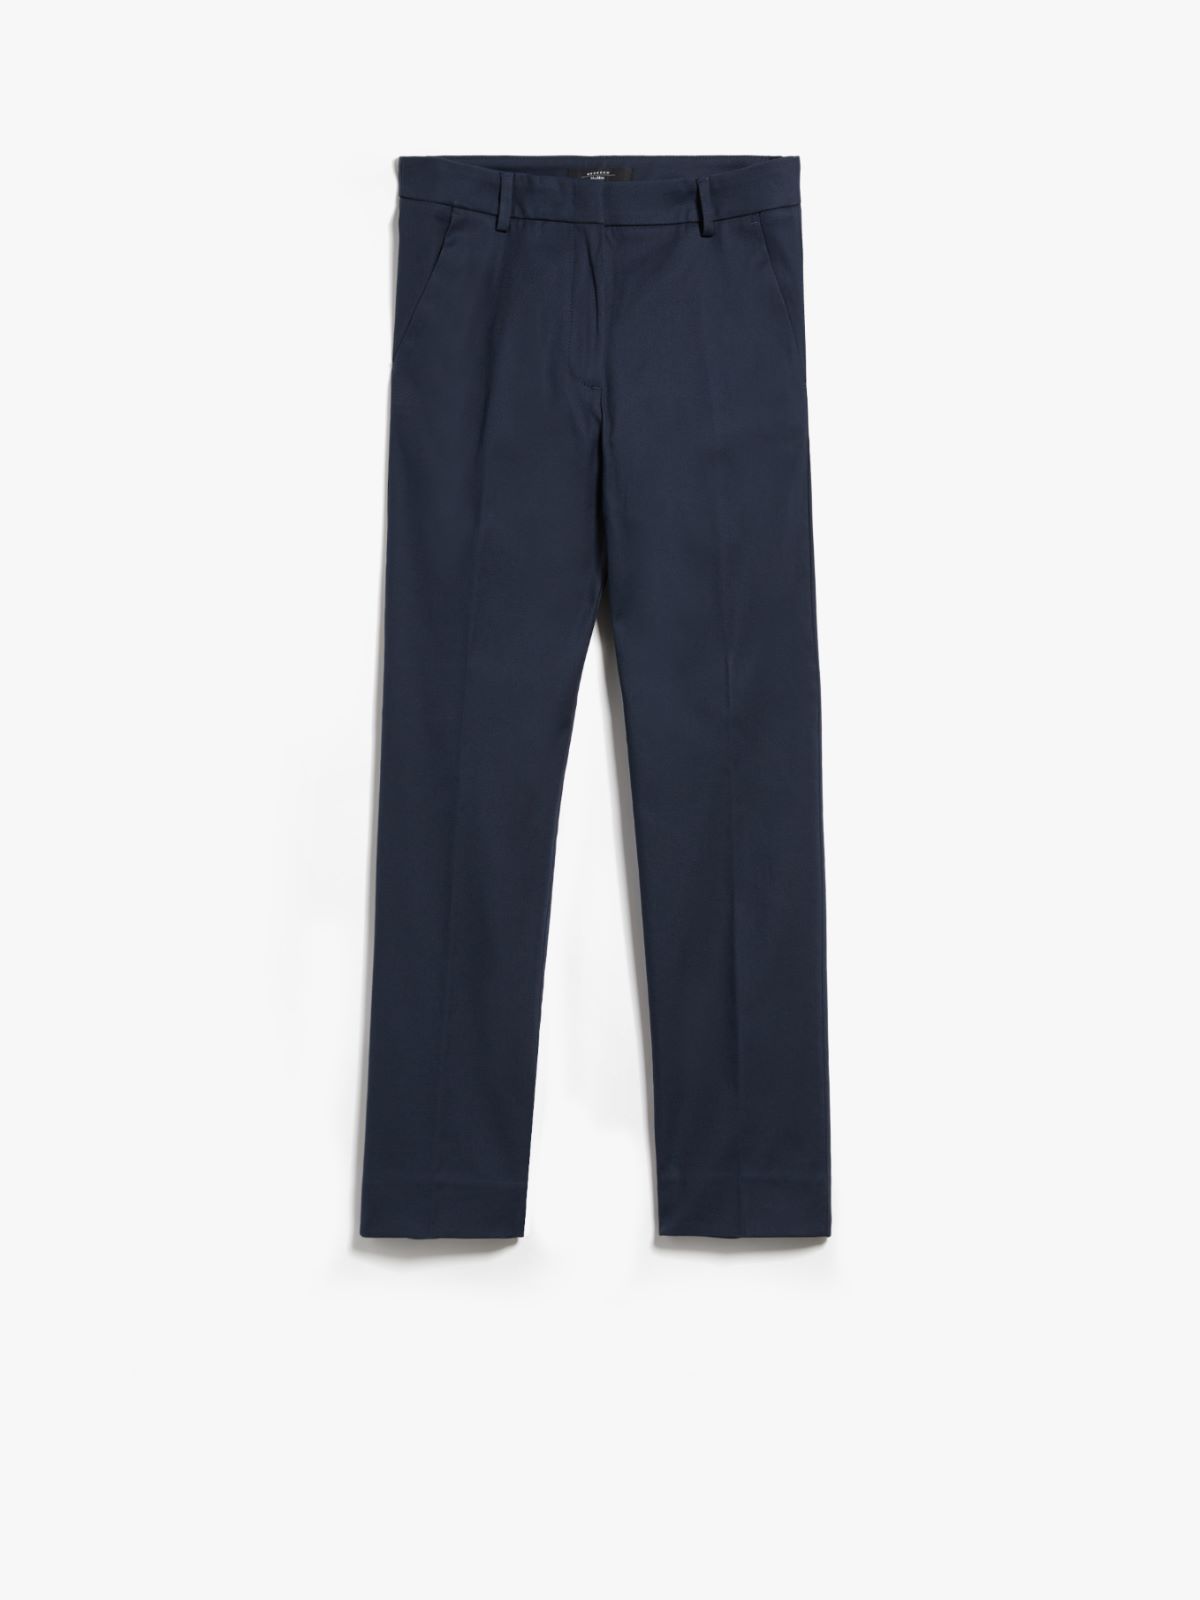 Cotton trousers - NAVY - Weekend Max Mara - 5